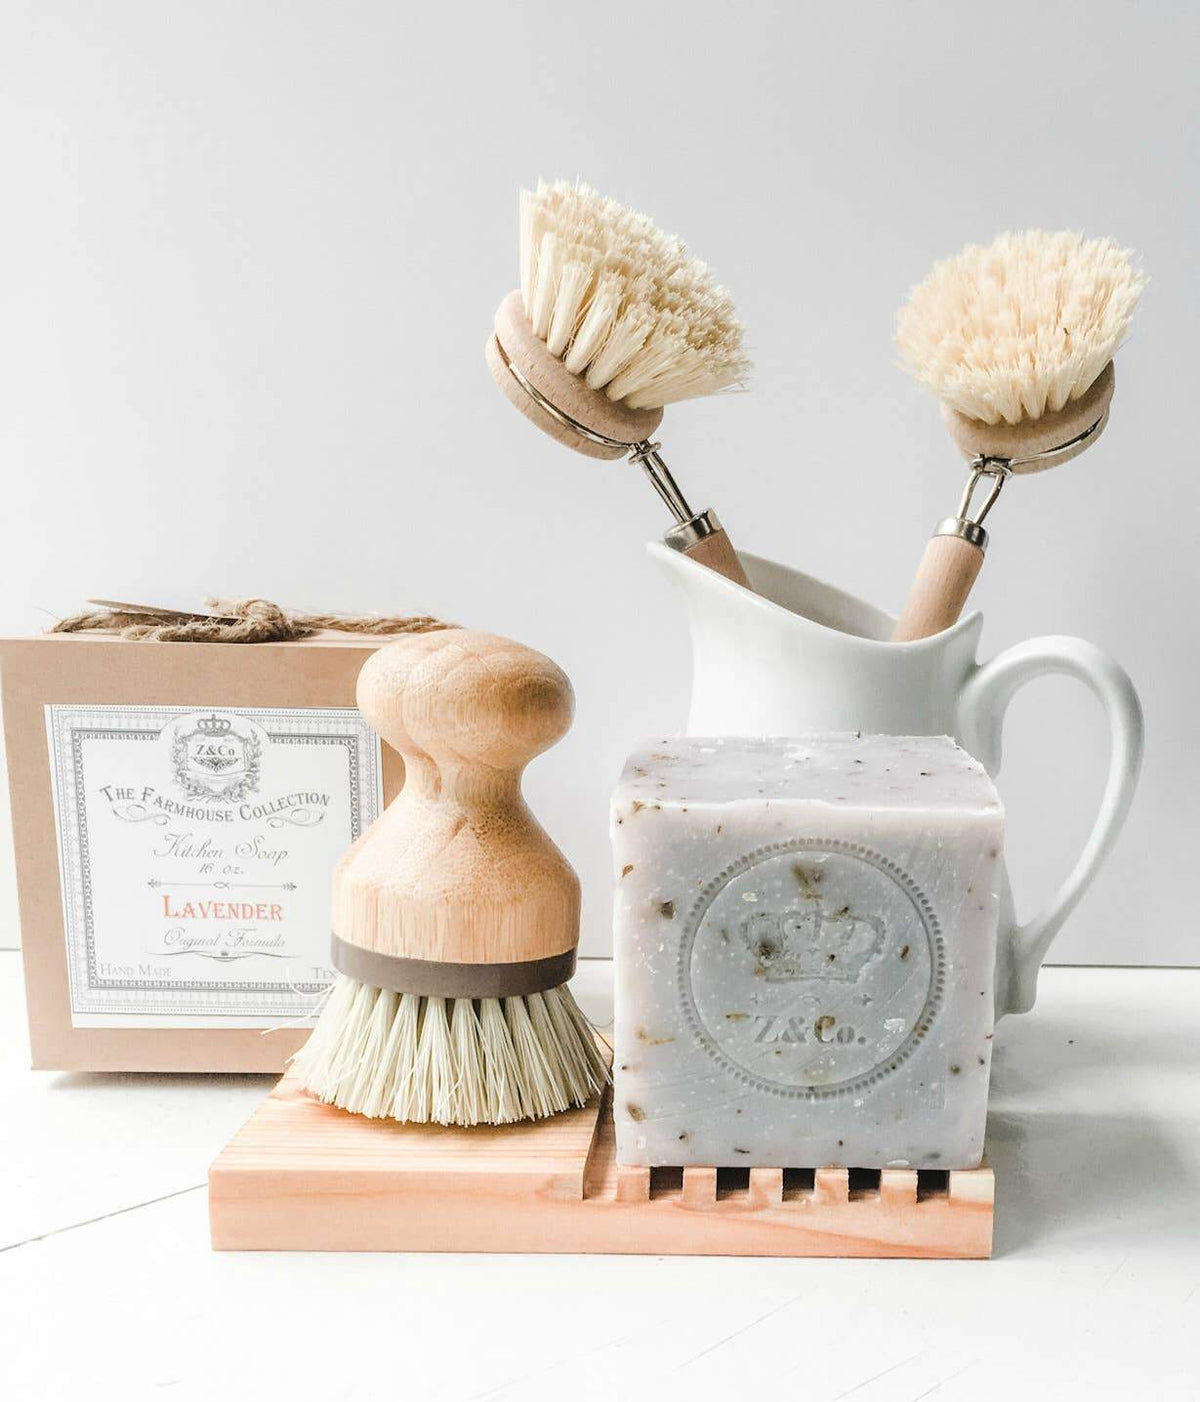 A neatly arranged set of eco-friendly cleaning products including a wooden brush, a scrubbing brush in a white ceramic pitcher, a bar of Zero Waste Farmhouse kitchen soap, and a box labeled "Z&Co. Lavender Farmhouse Solid-Block Dish Soap".